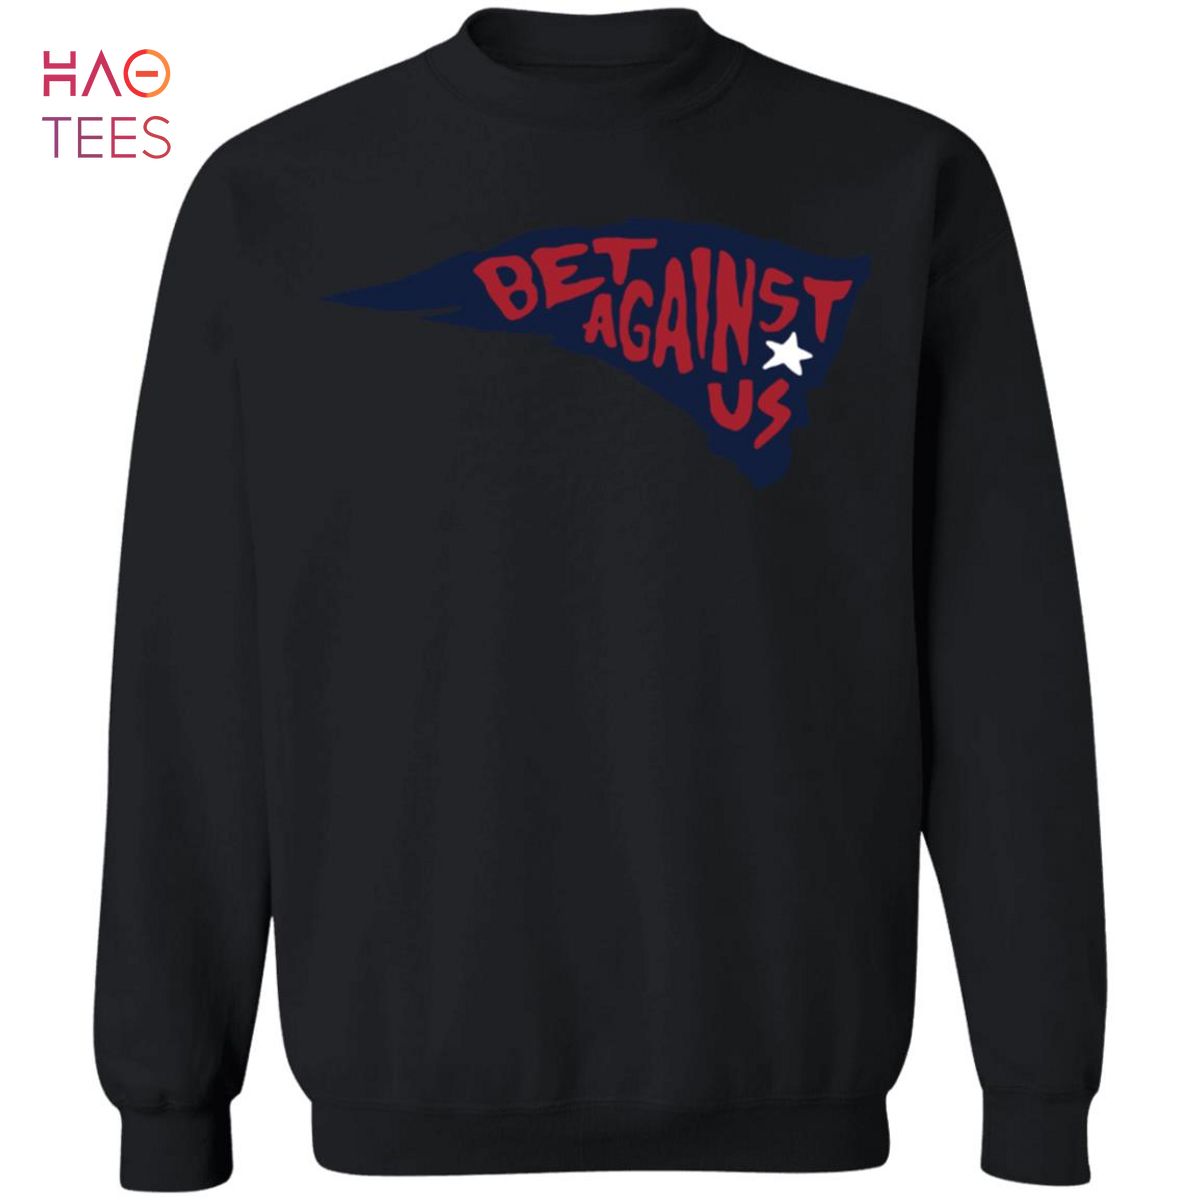 [NEW] Patriots Bet Against Us Sweater